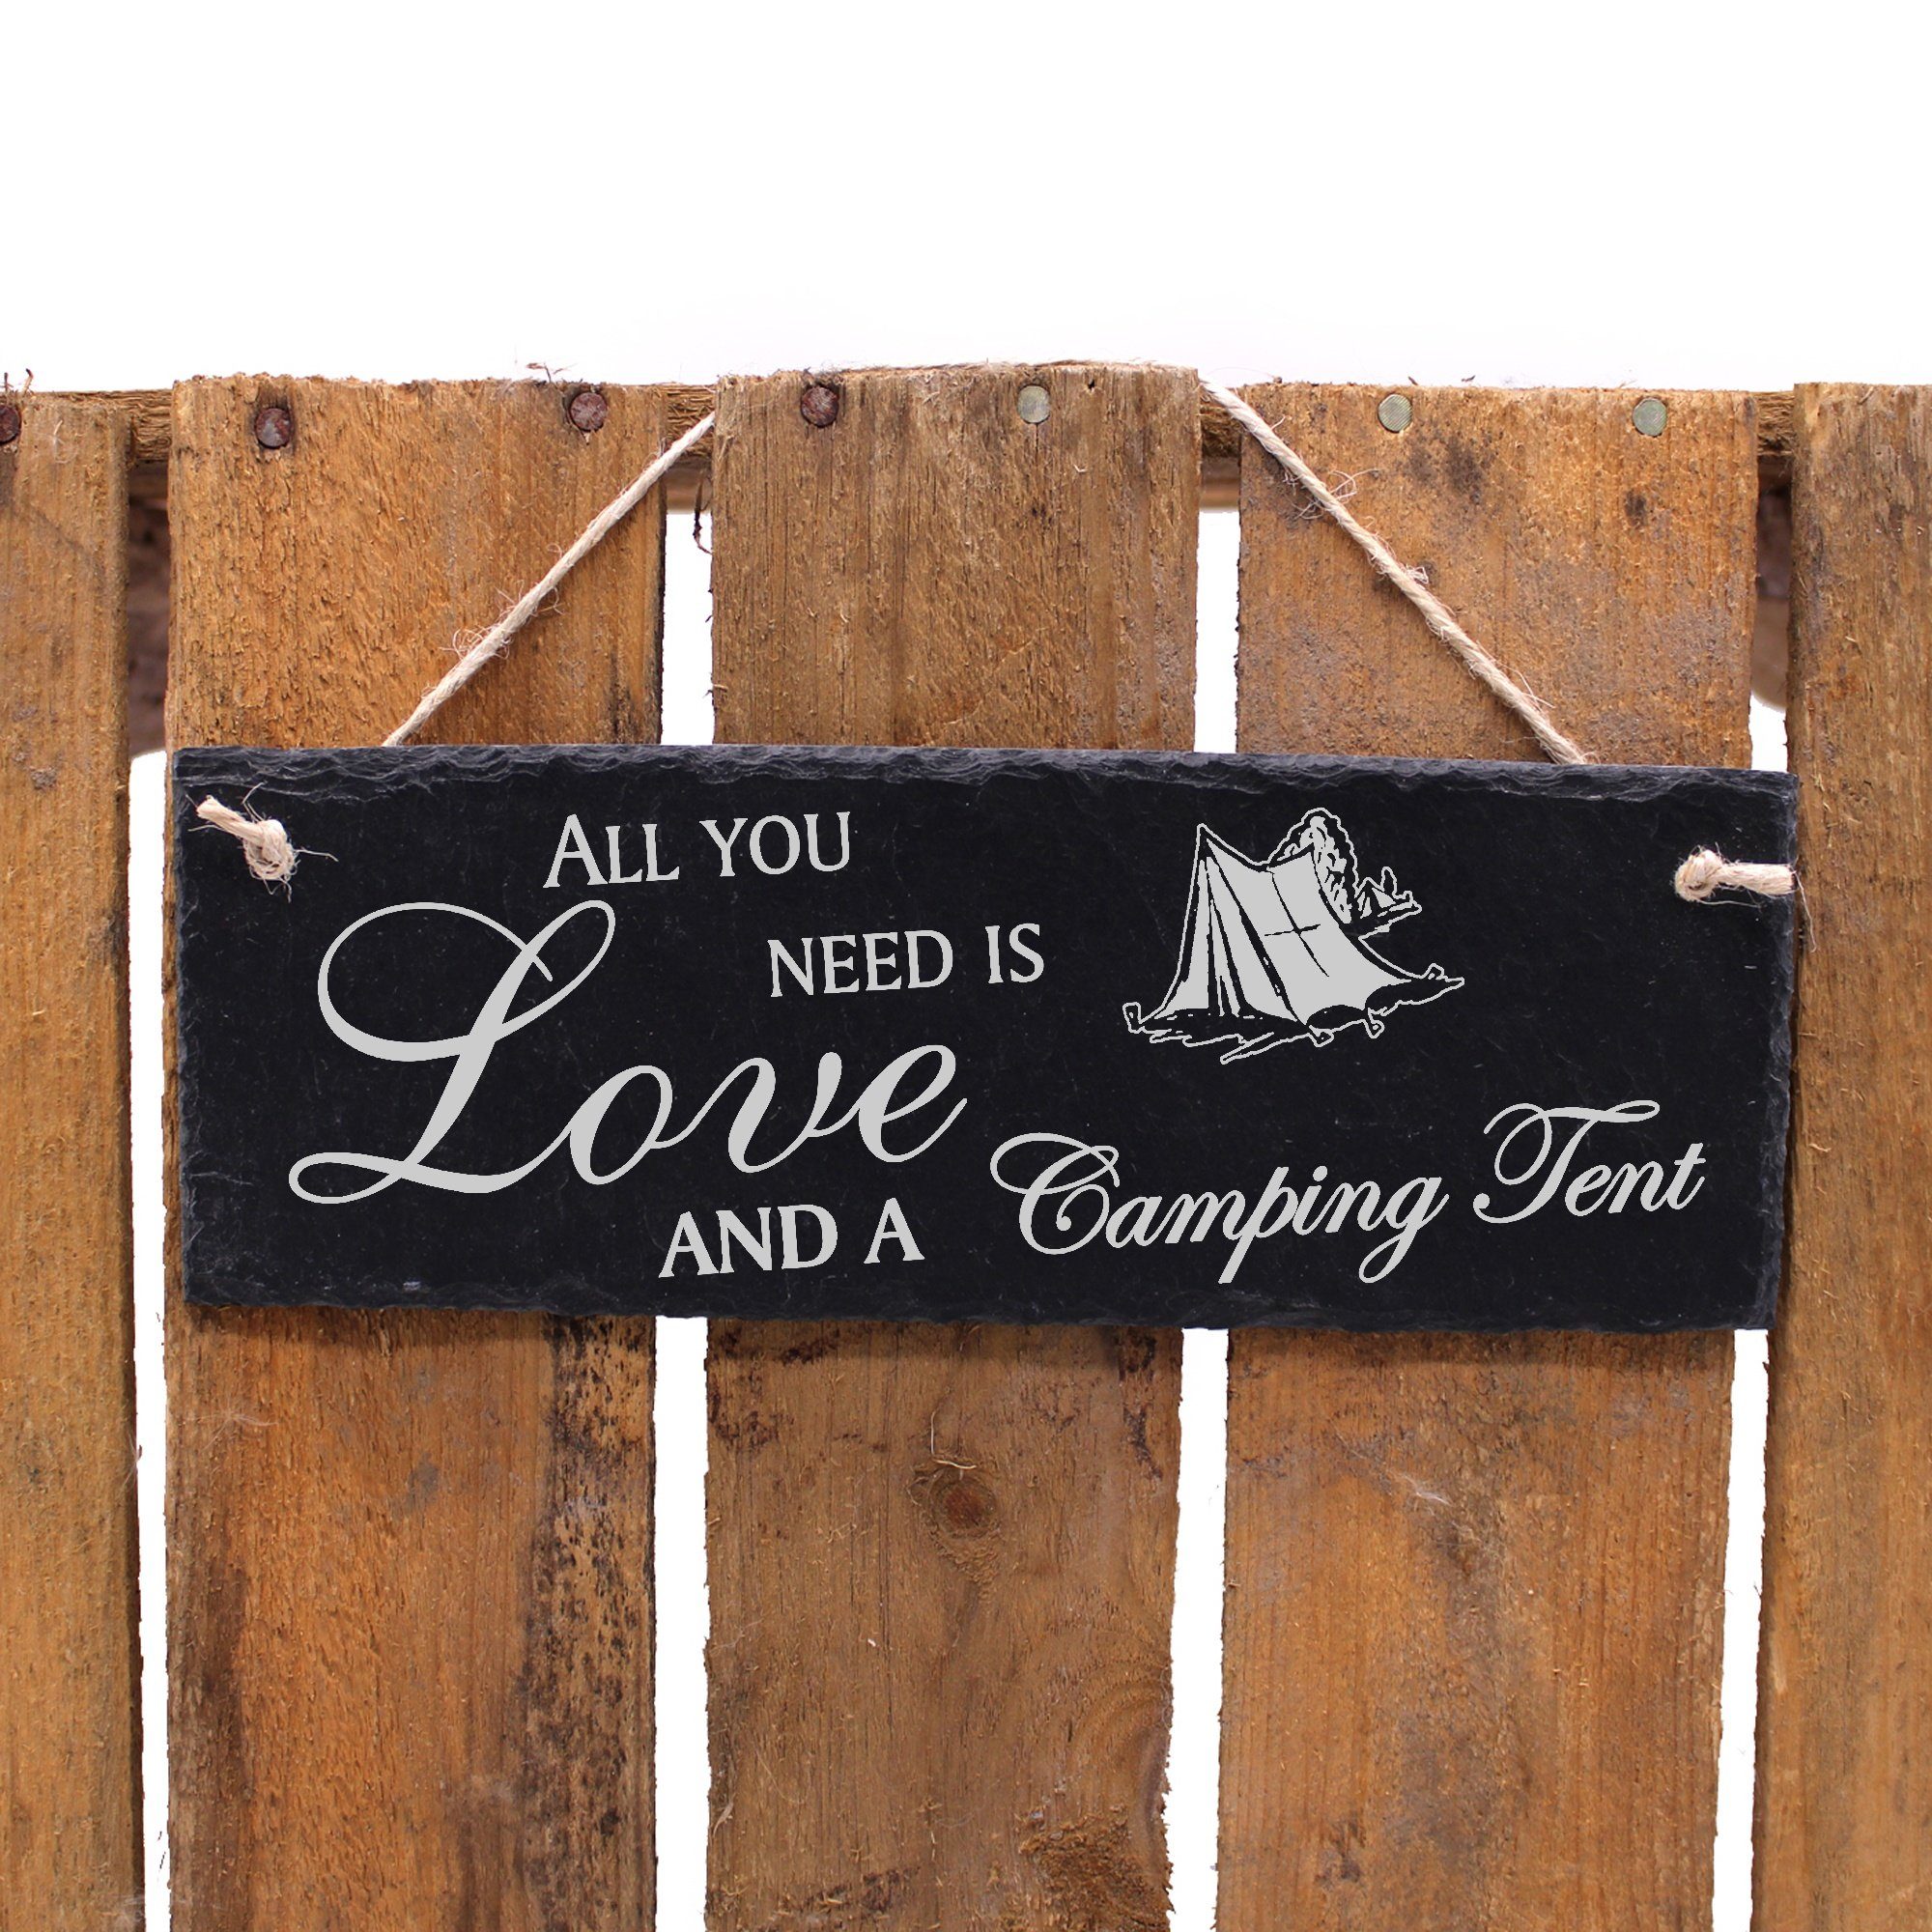 Dekolando Hängedekoration Campingzelt All you Camping is and Tent need 22x8cm a Love